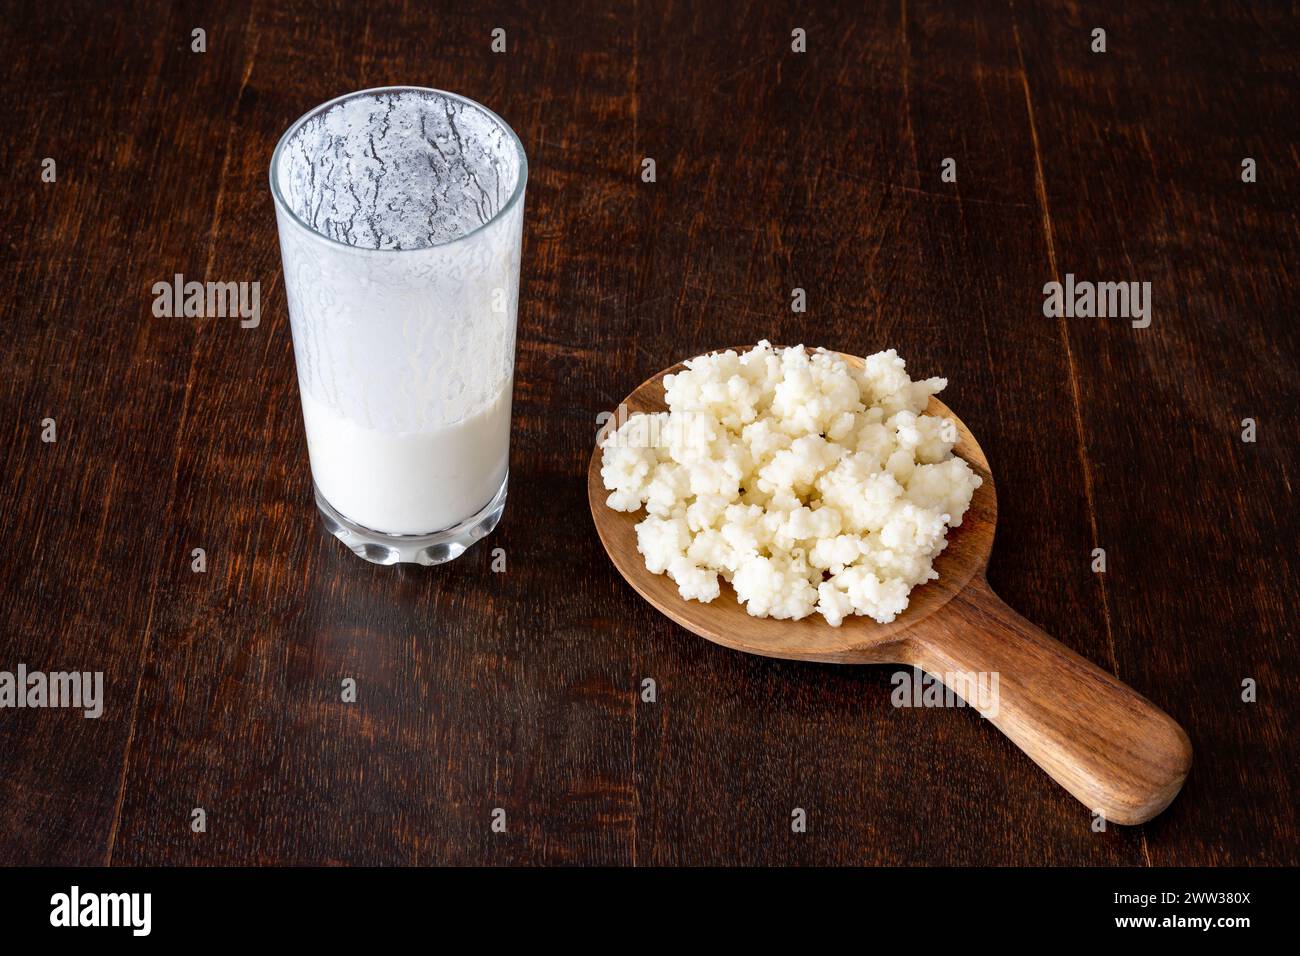 Kefir grains and fermented milk drink isolated on a rustic wooden table Stock Photo